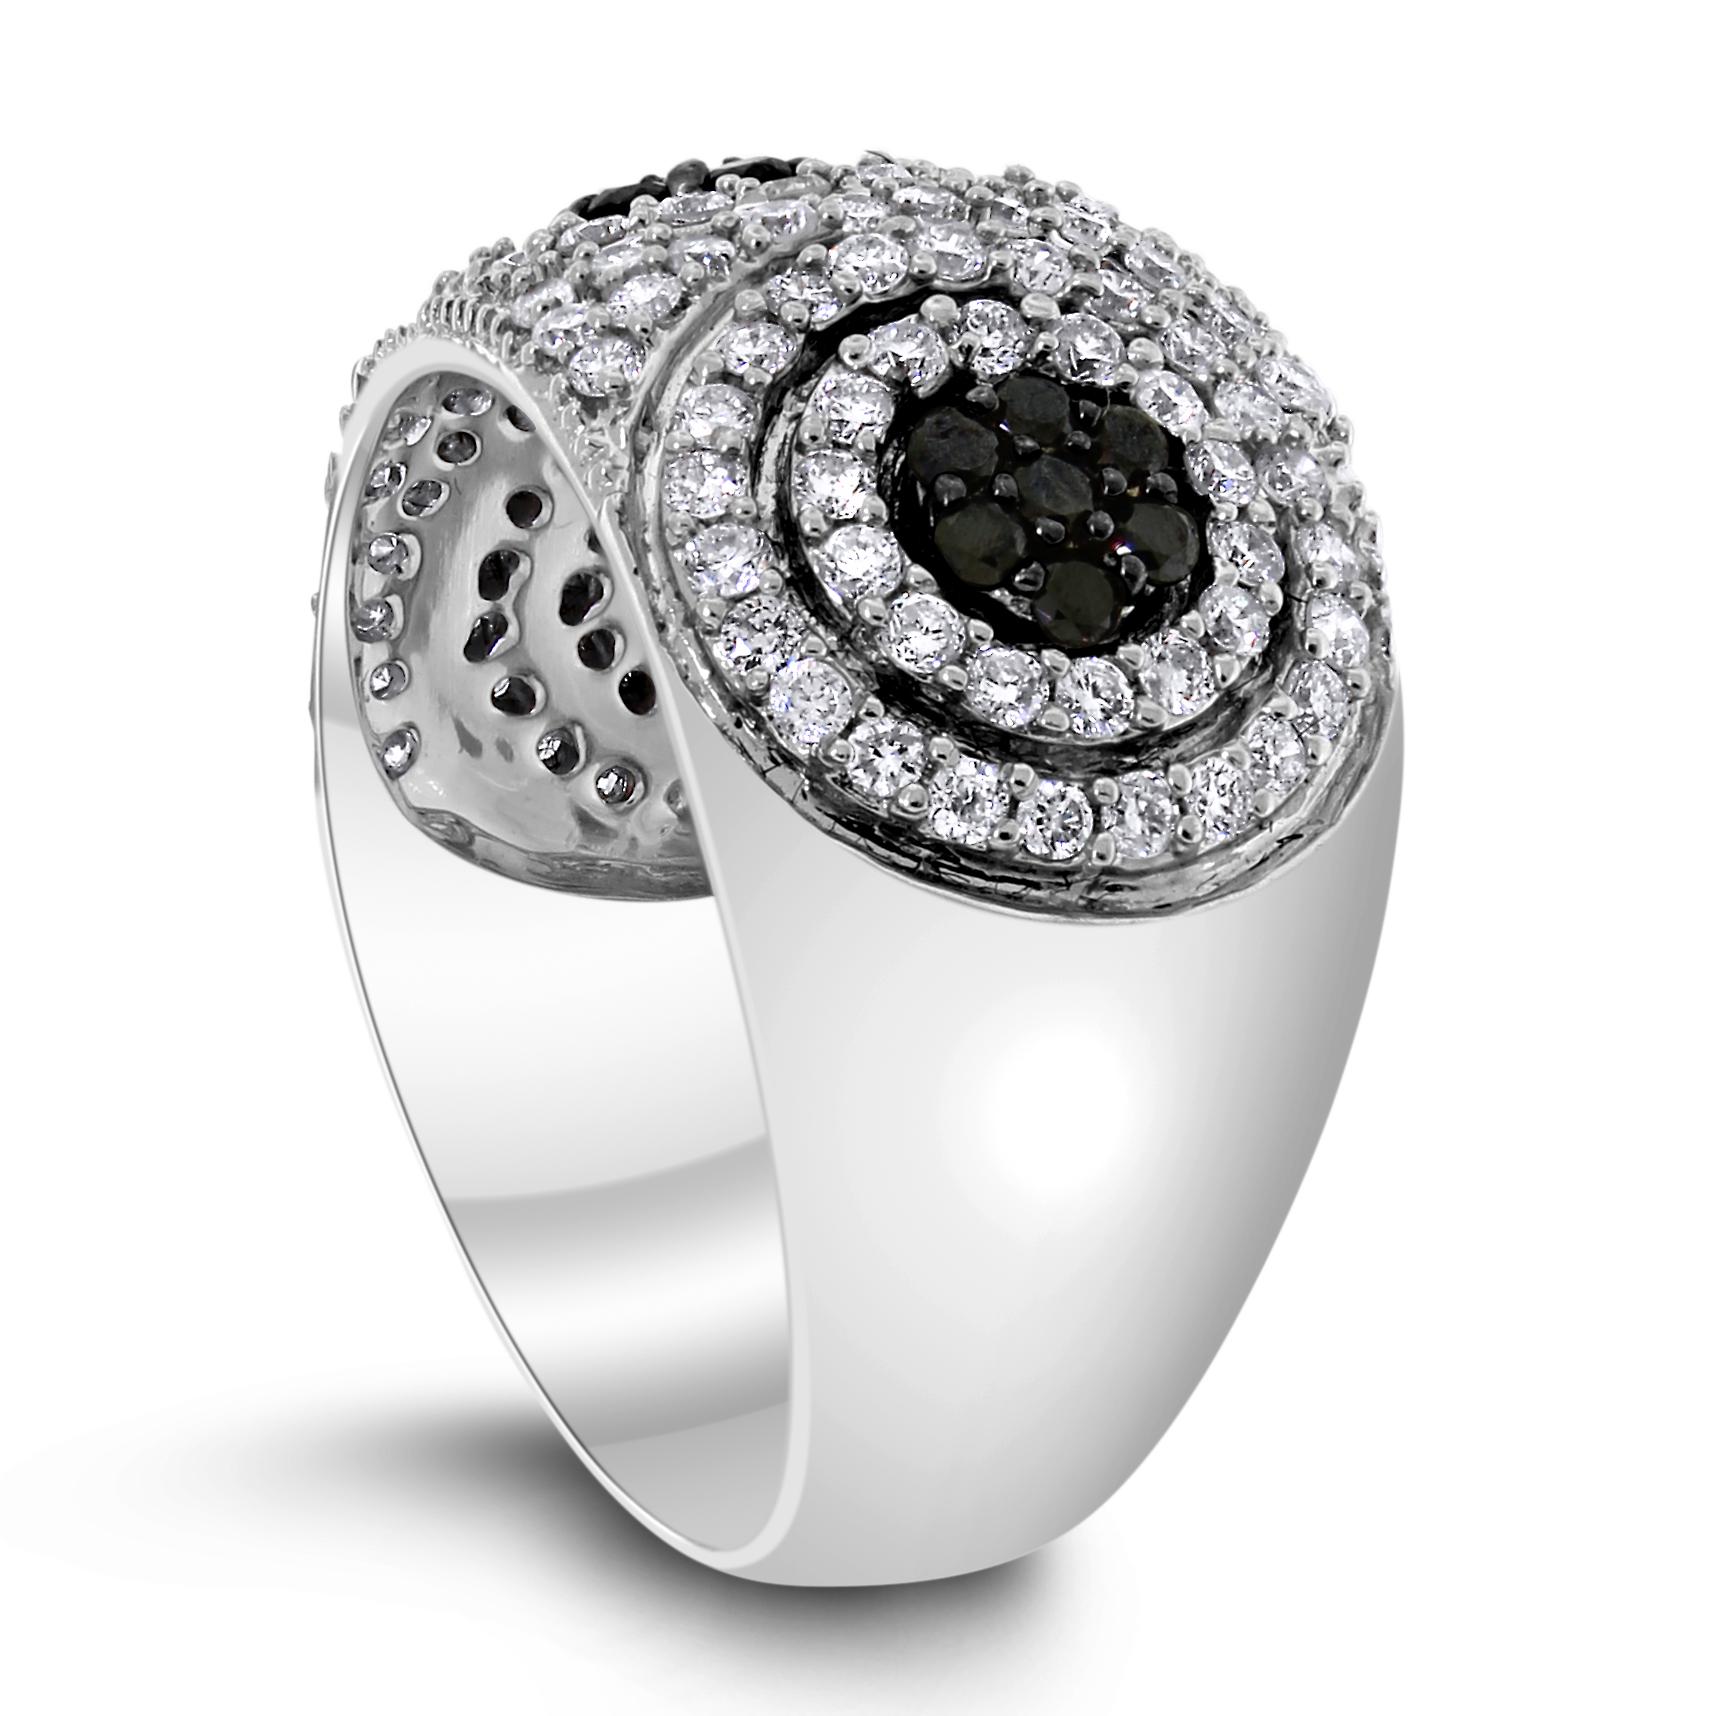 This white & black diamond band ring is all about fun and frolic.

Diamonds Shape: Round
Diamonds Weight: 0.95 ct (White) & 0.30 ct (Black)
Diamonds Color: F - G & Black
Diamonds Clarity: SI - I

Metal: 14K White Gold
Metal Wt: 6.45 gms 
Setting: